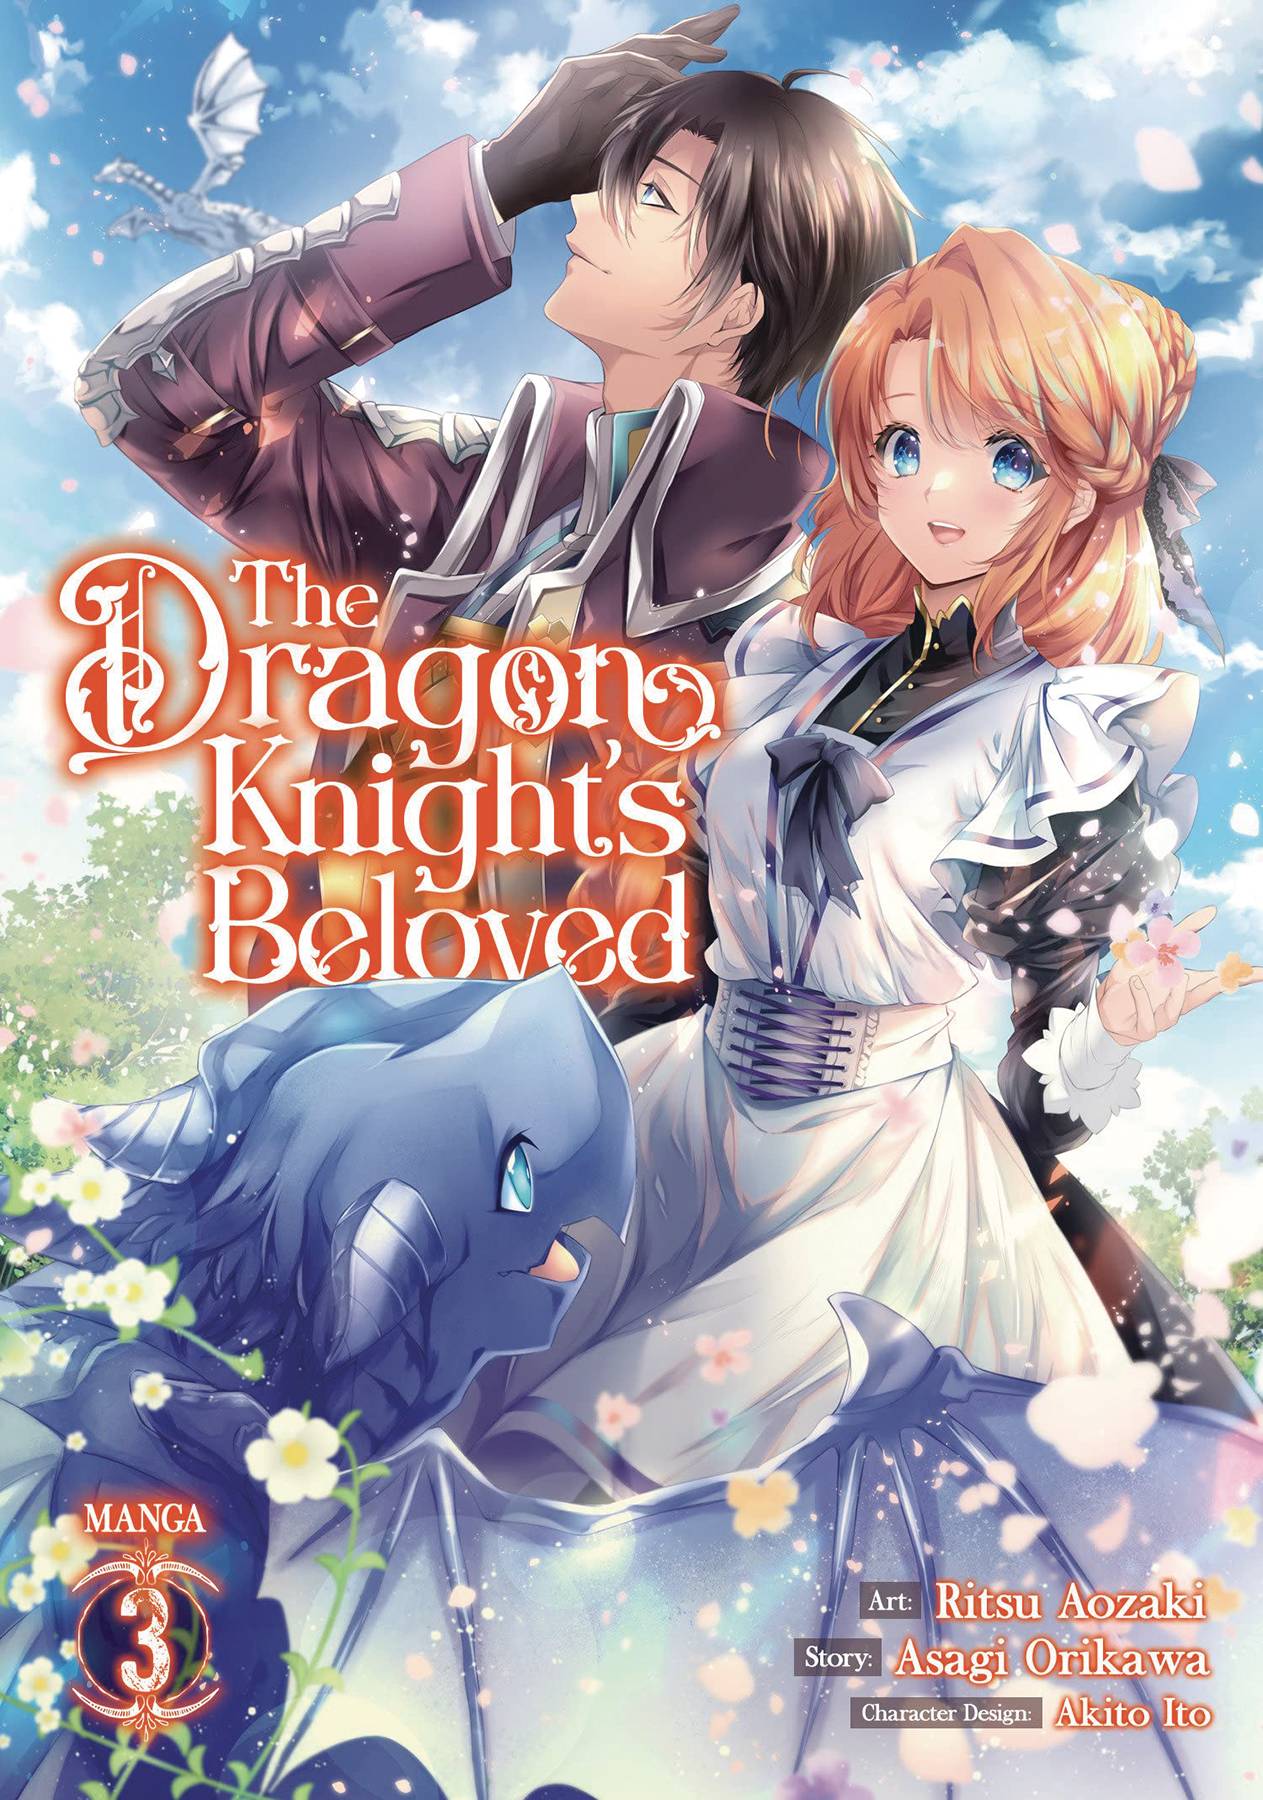 The One Stop Shop Comics & Games Dragon Knights Beloved Gn Vol 03 (C: 0-1-0) (08/24/2022) SEVEN SEAS ENTERTAINMENT